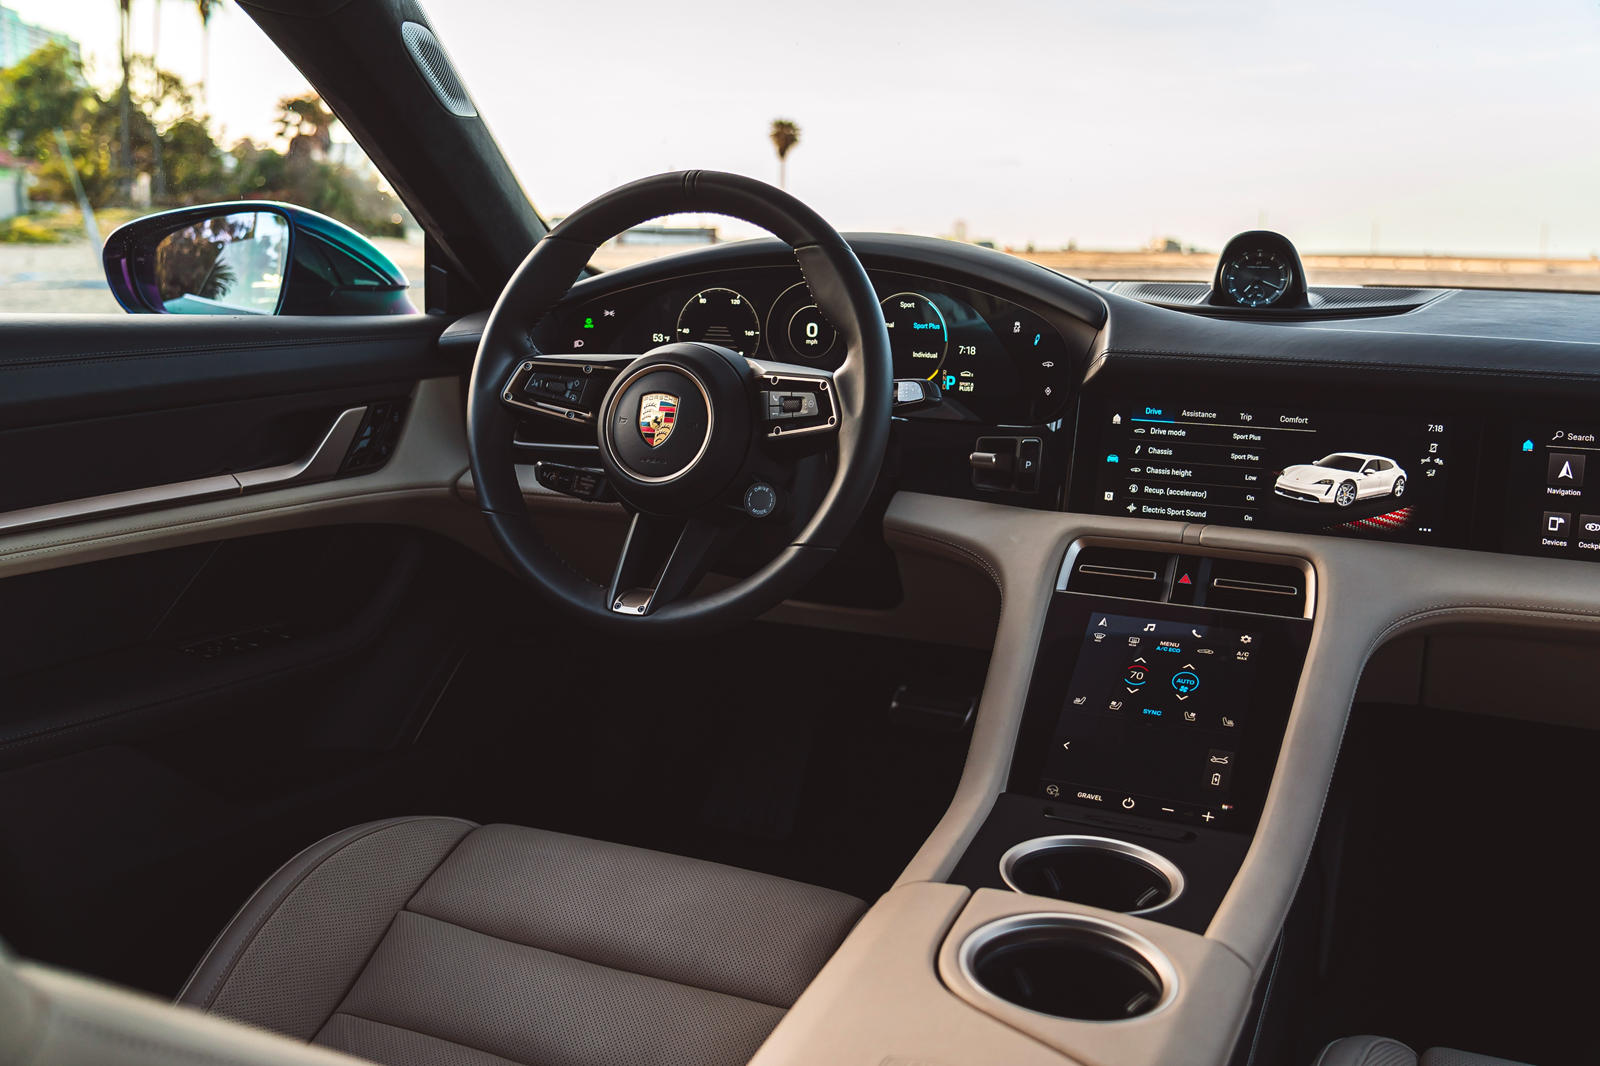 2022 Porsche Taycan Interior Features, Comfort, and Technology